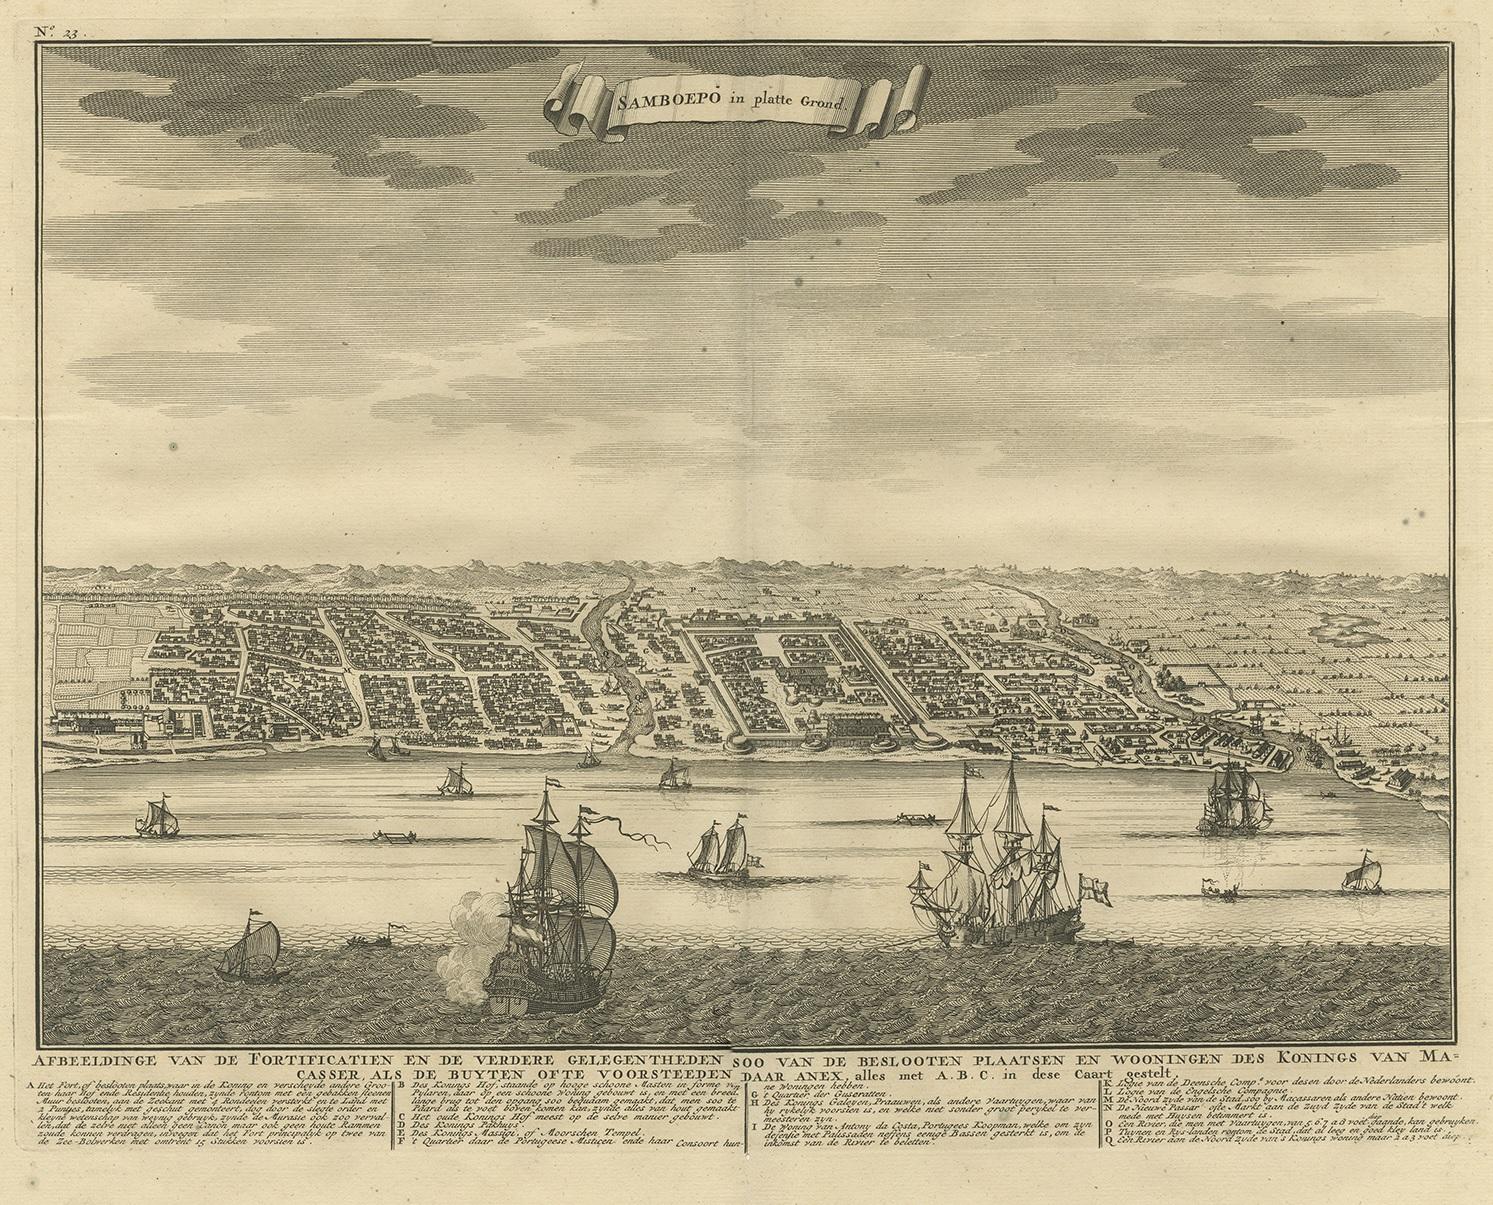 Antique map titled 'Samboepo in 't Verschiet'. Decorative panoramic view of the town of Samboupo on the island of Celebes (Sulawesi) in today's Indonesia. Dutch (V.O.C.) sailing ships and various local craft fill the foreground. The city with great